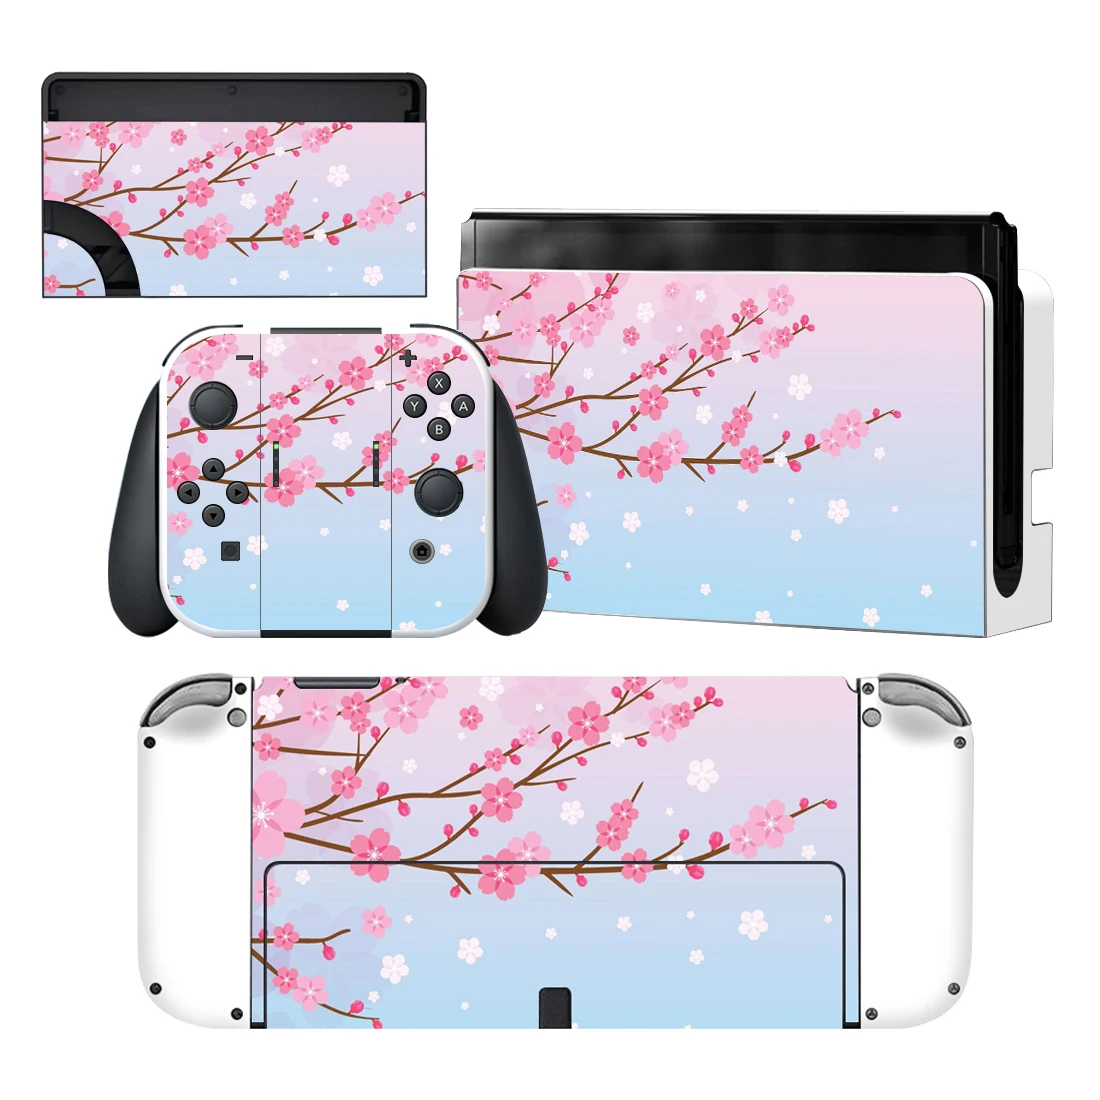 

Cherry Blossom Sakura Nintendoswitch Skin Cover Sticker Decal for Nintendo Switch OLED Console Joy-con Controller Dock Vinyl